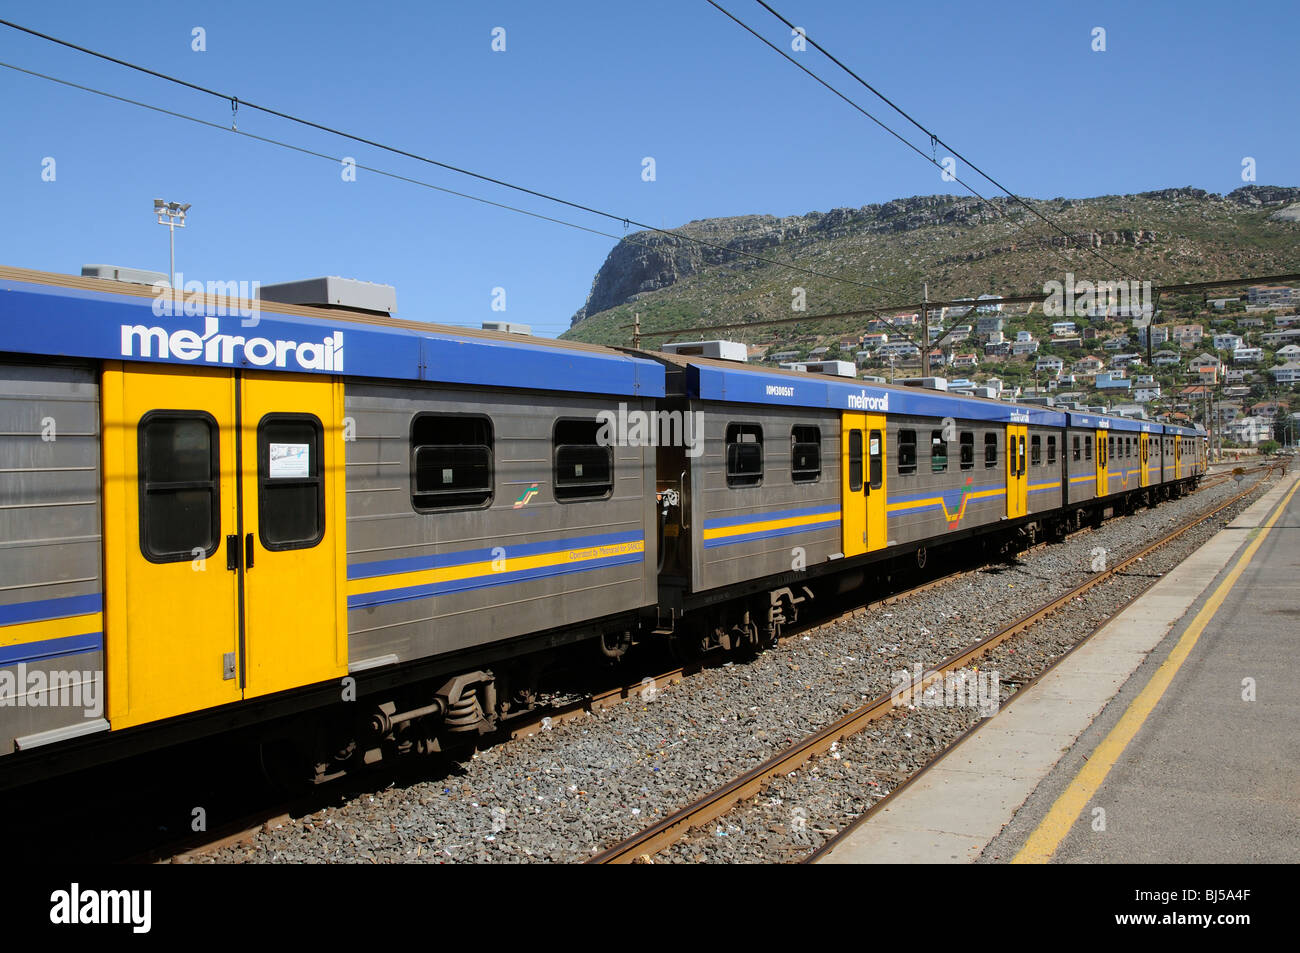 Metrorail commuter train at Fish Hoek railway station The line runs a coastal route from Cape Town to Simonstown S Africa Stock Photo